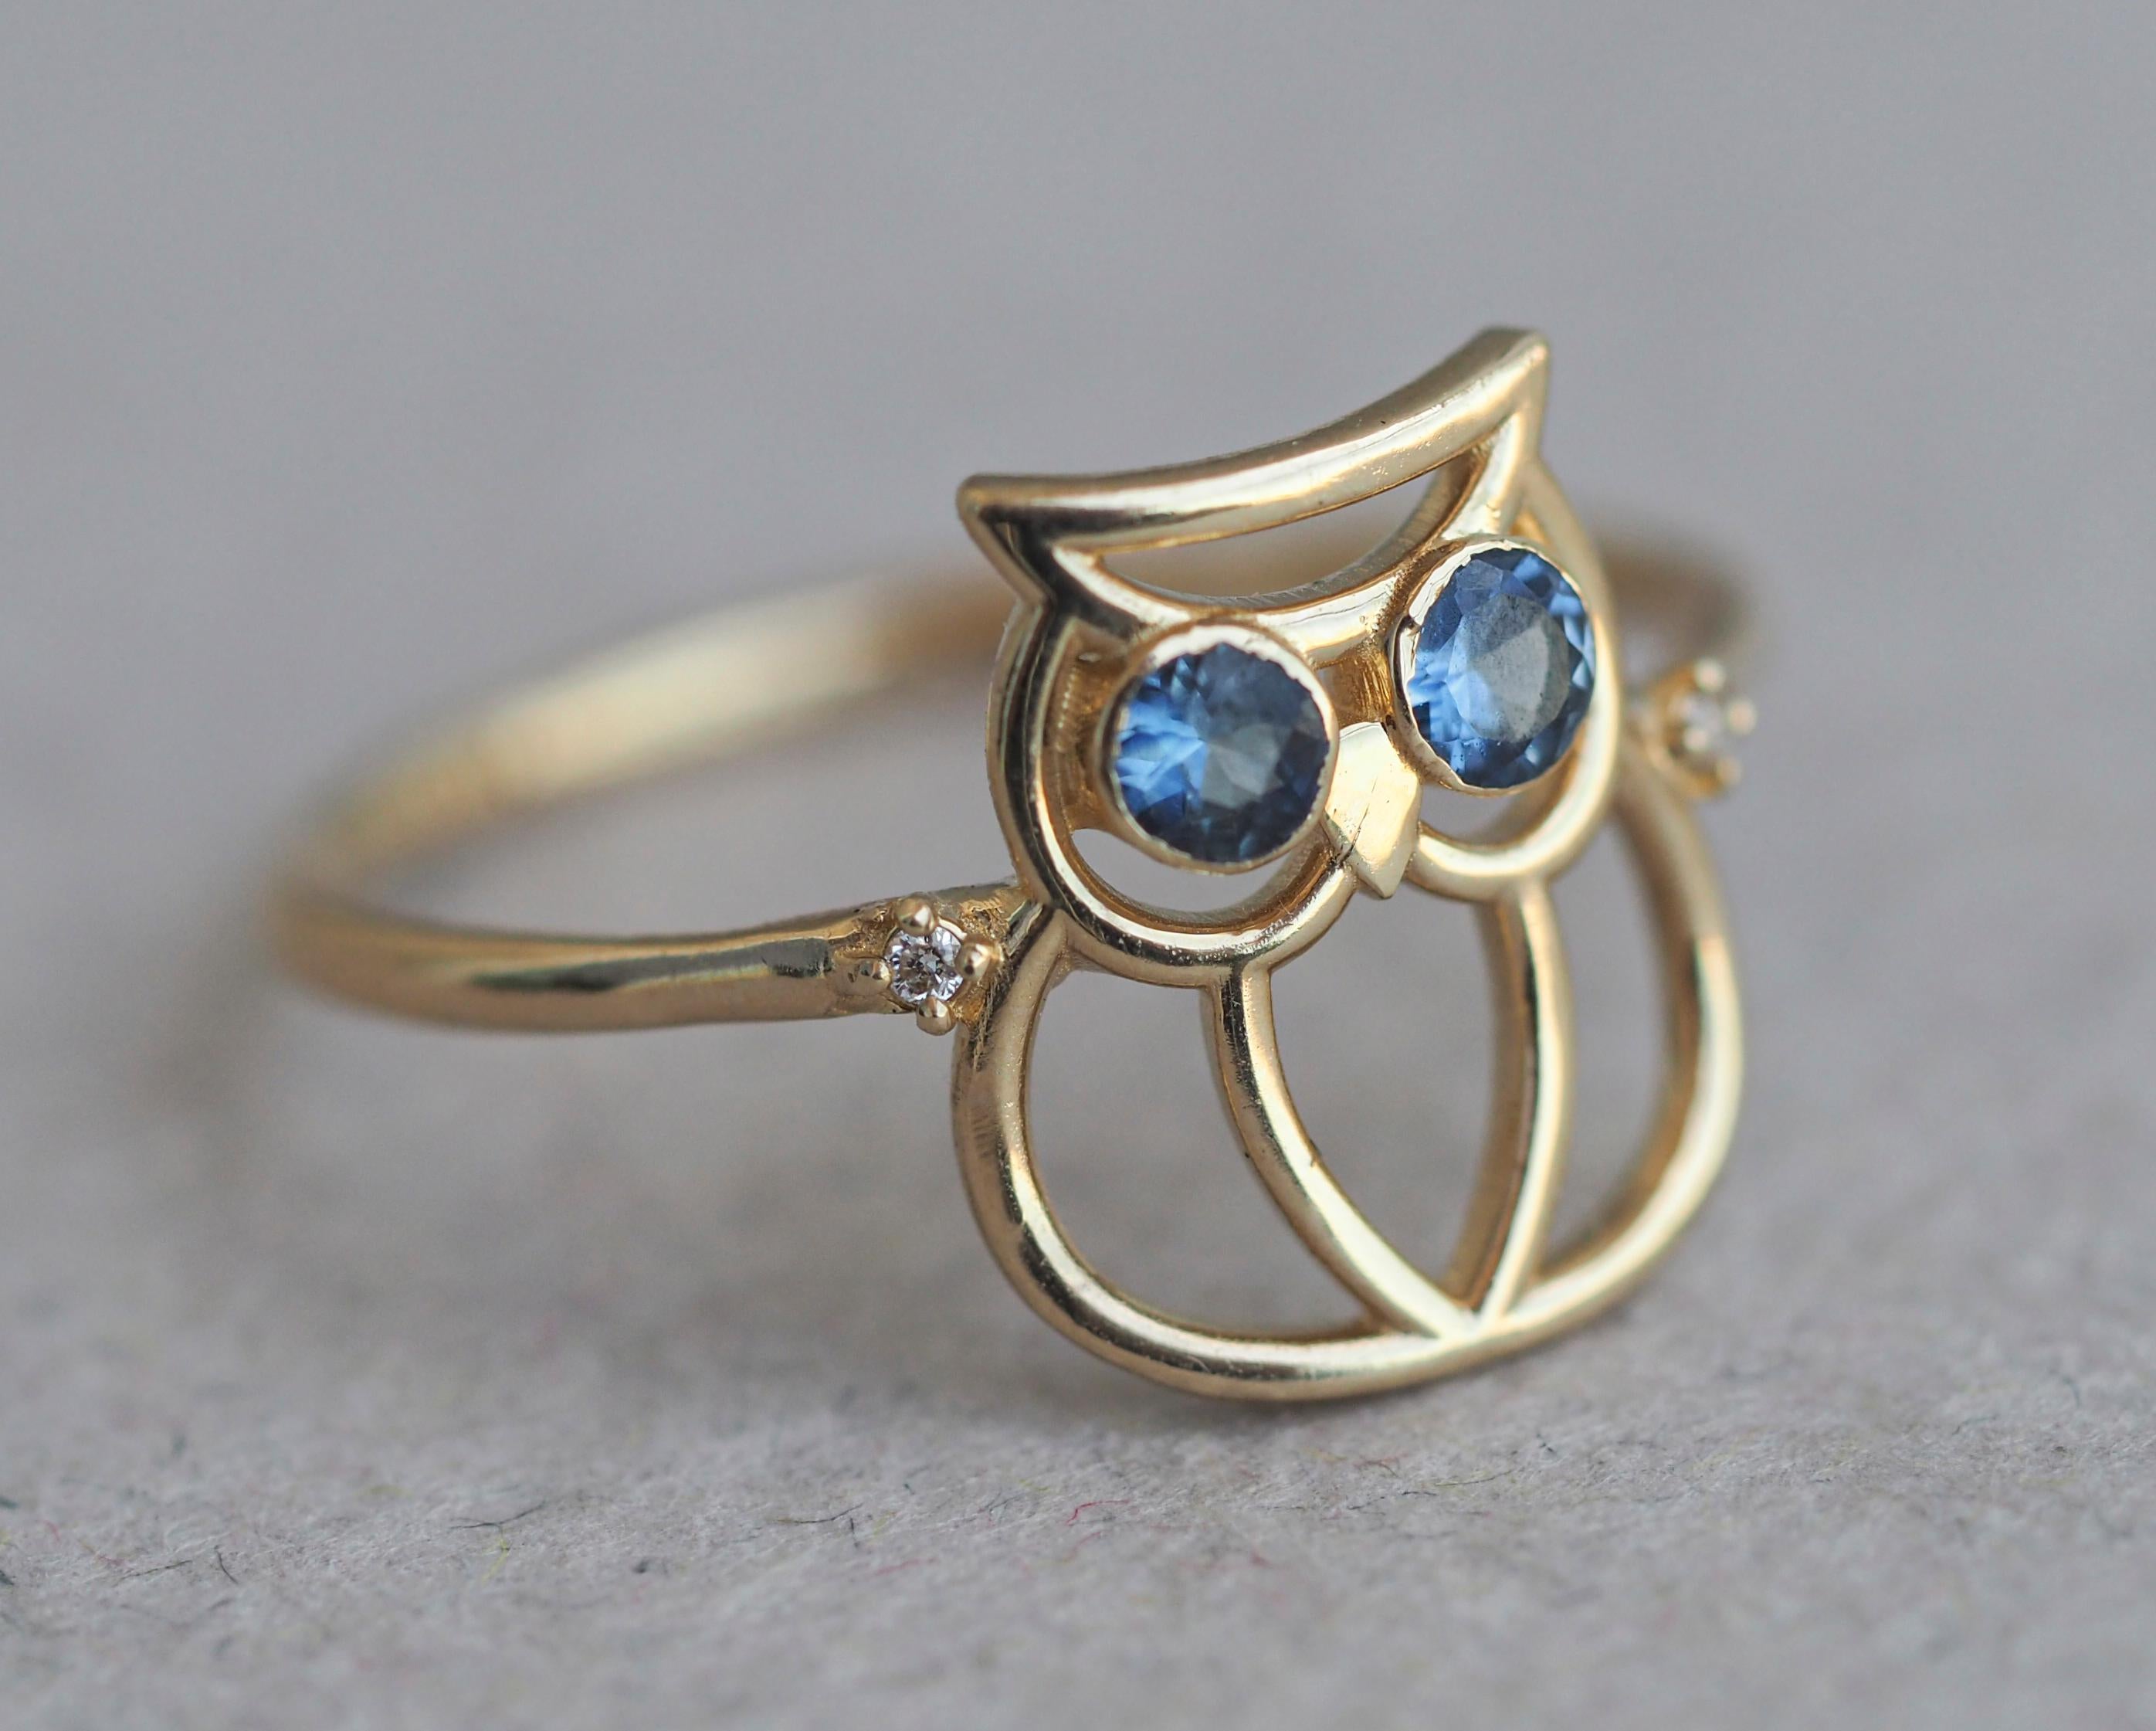 Modern 14k Gold Owl Ring with Tanzanite and Diamonds